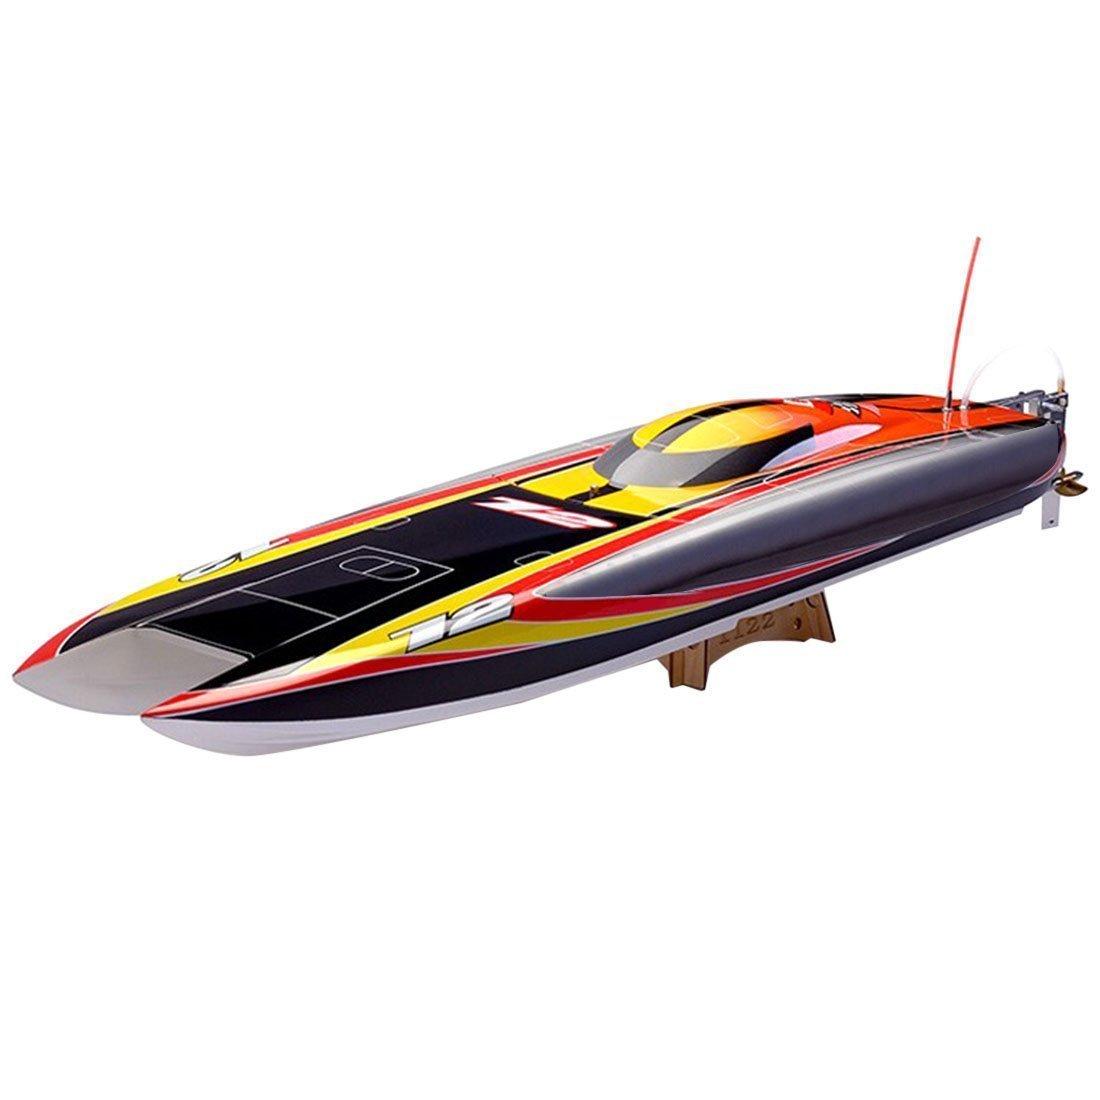 Electric Rc Speed Boat: Features of Electric RC Speed Boats